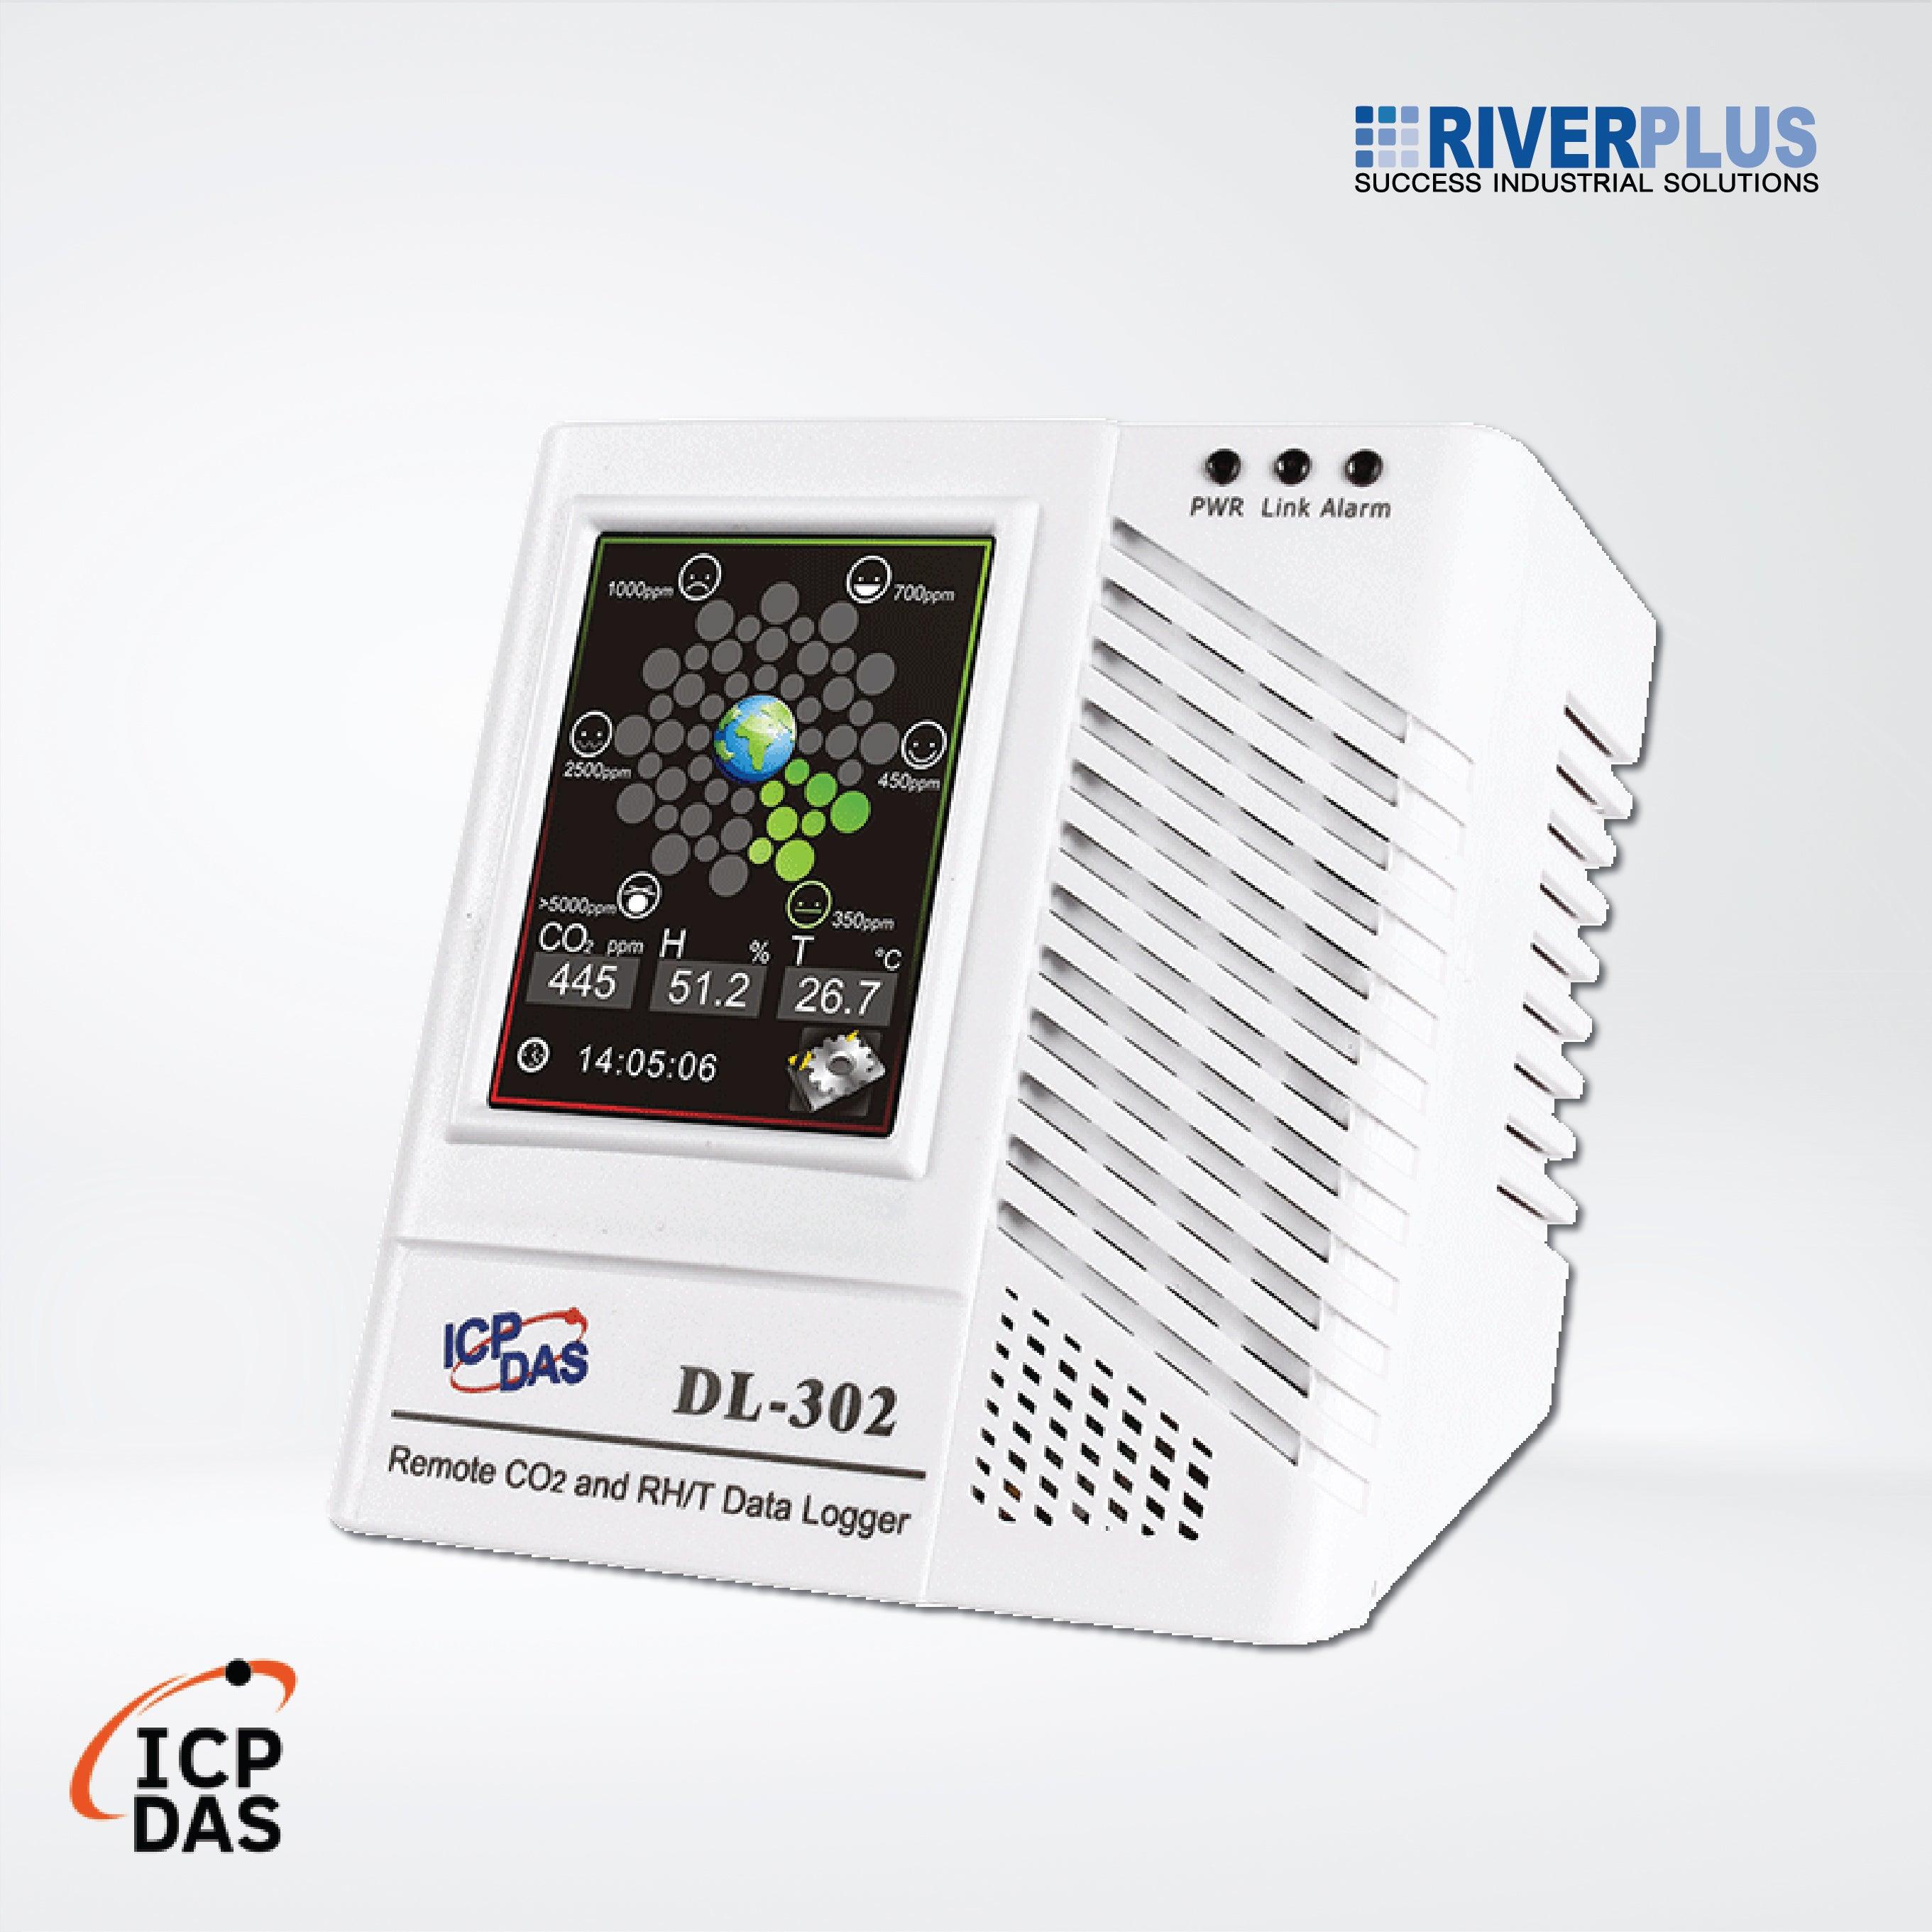 DL-302 Remote CO2/Temperature/Humidity/Dew Point Data Logger - Riverplus